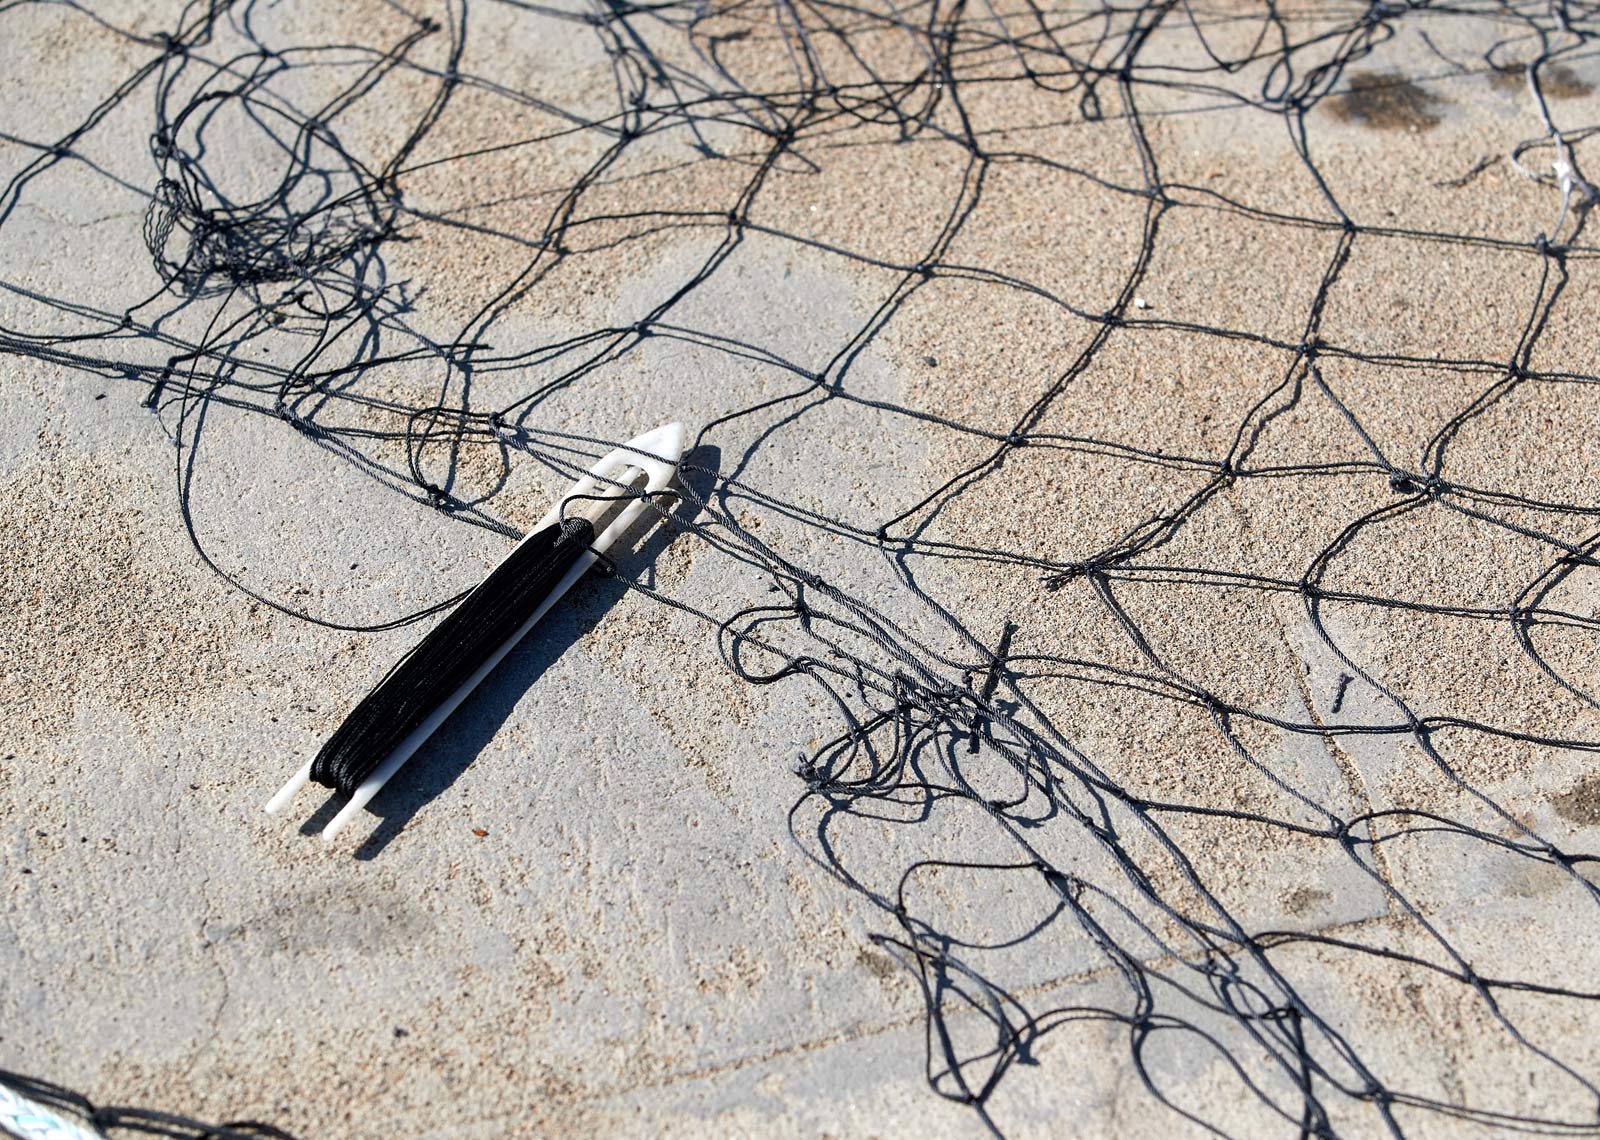 Twine Wrapped Around a Netting Needle Next to a Fishing Net